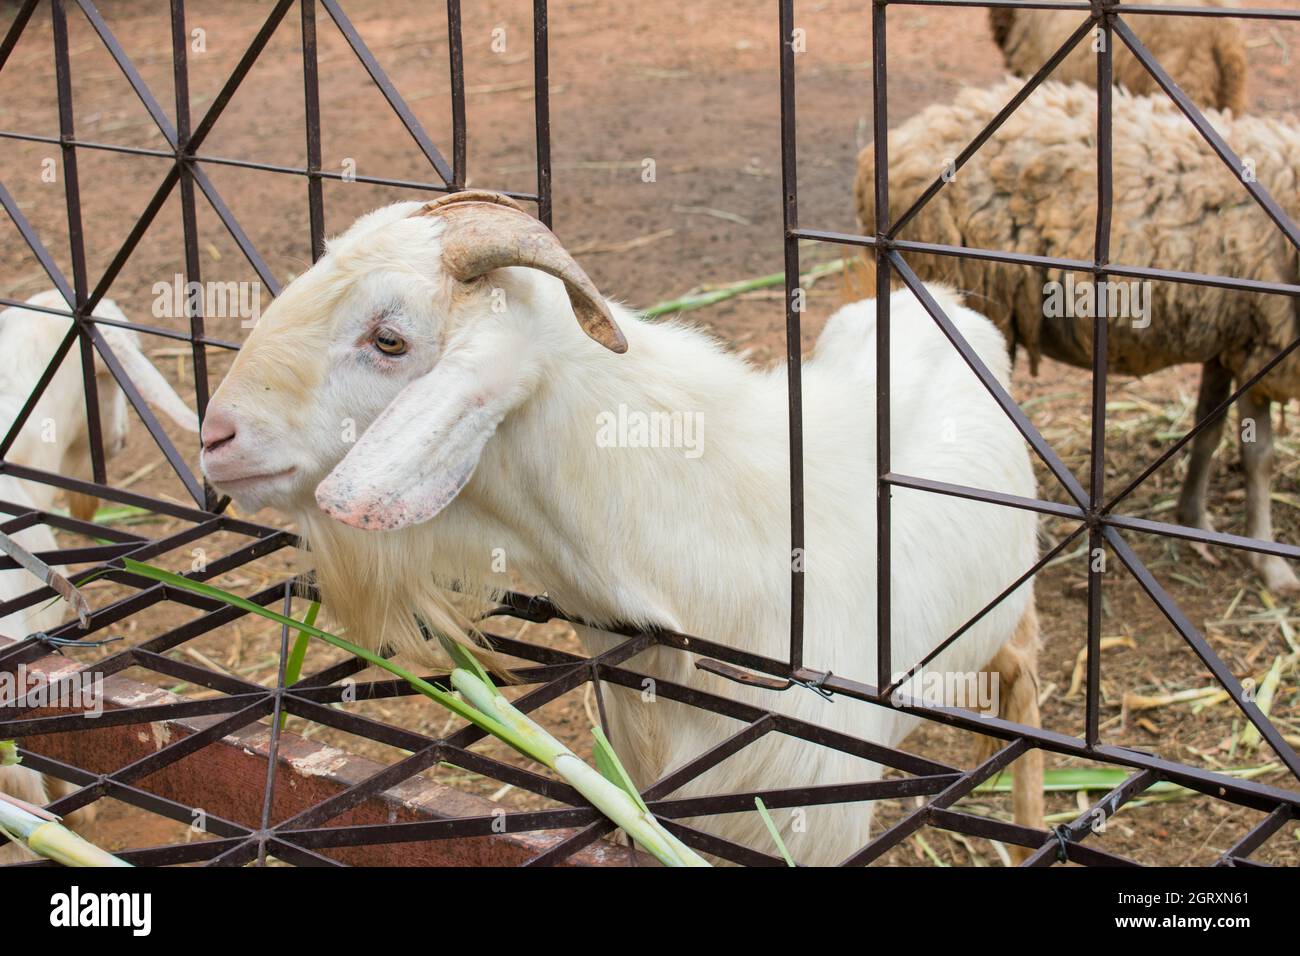 High Angle View Of Goat In Cage Stock Photo - Alamy